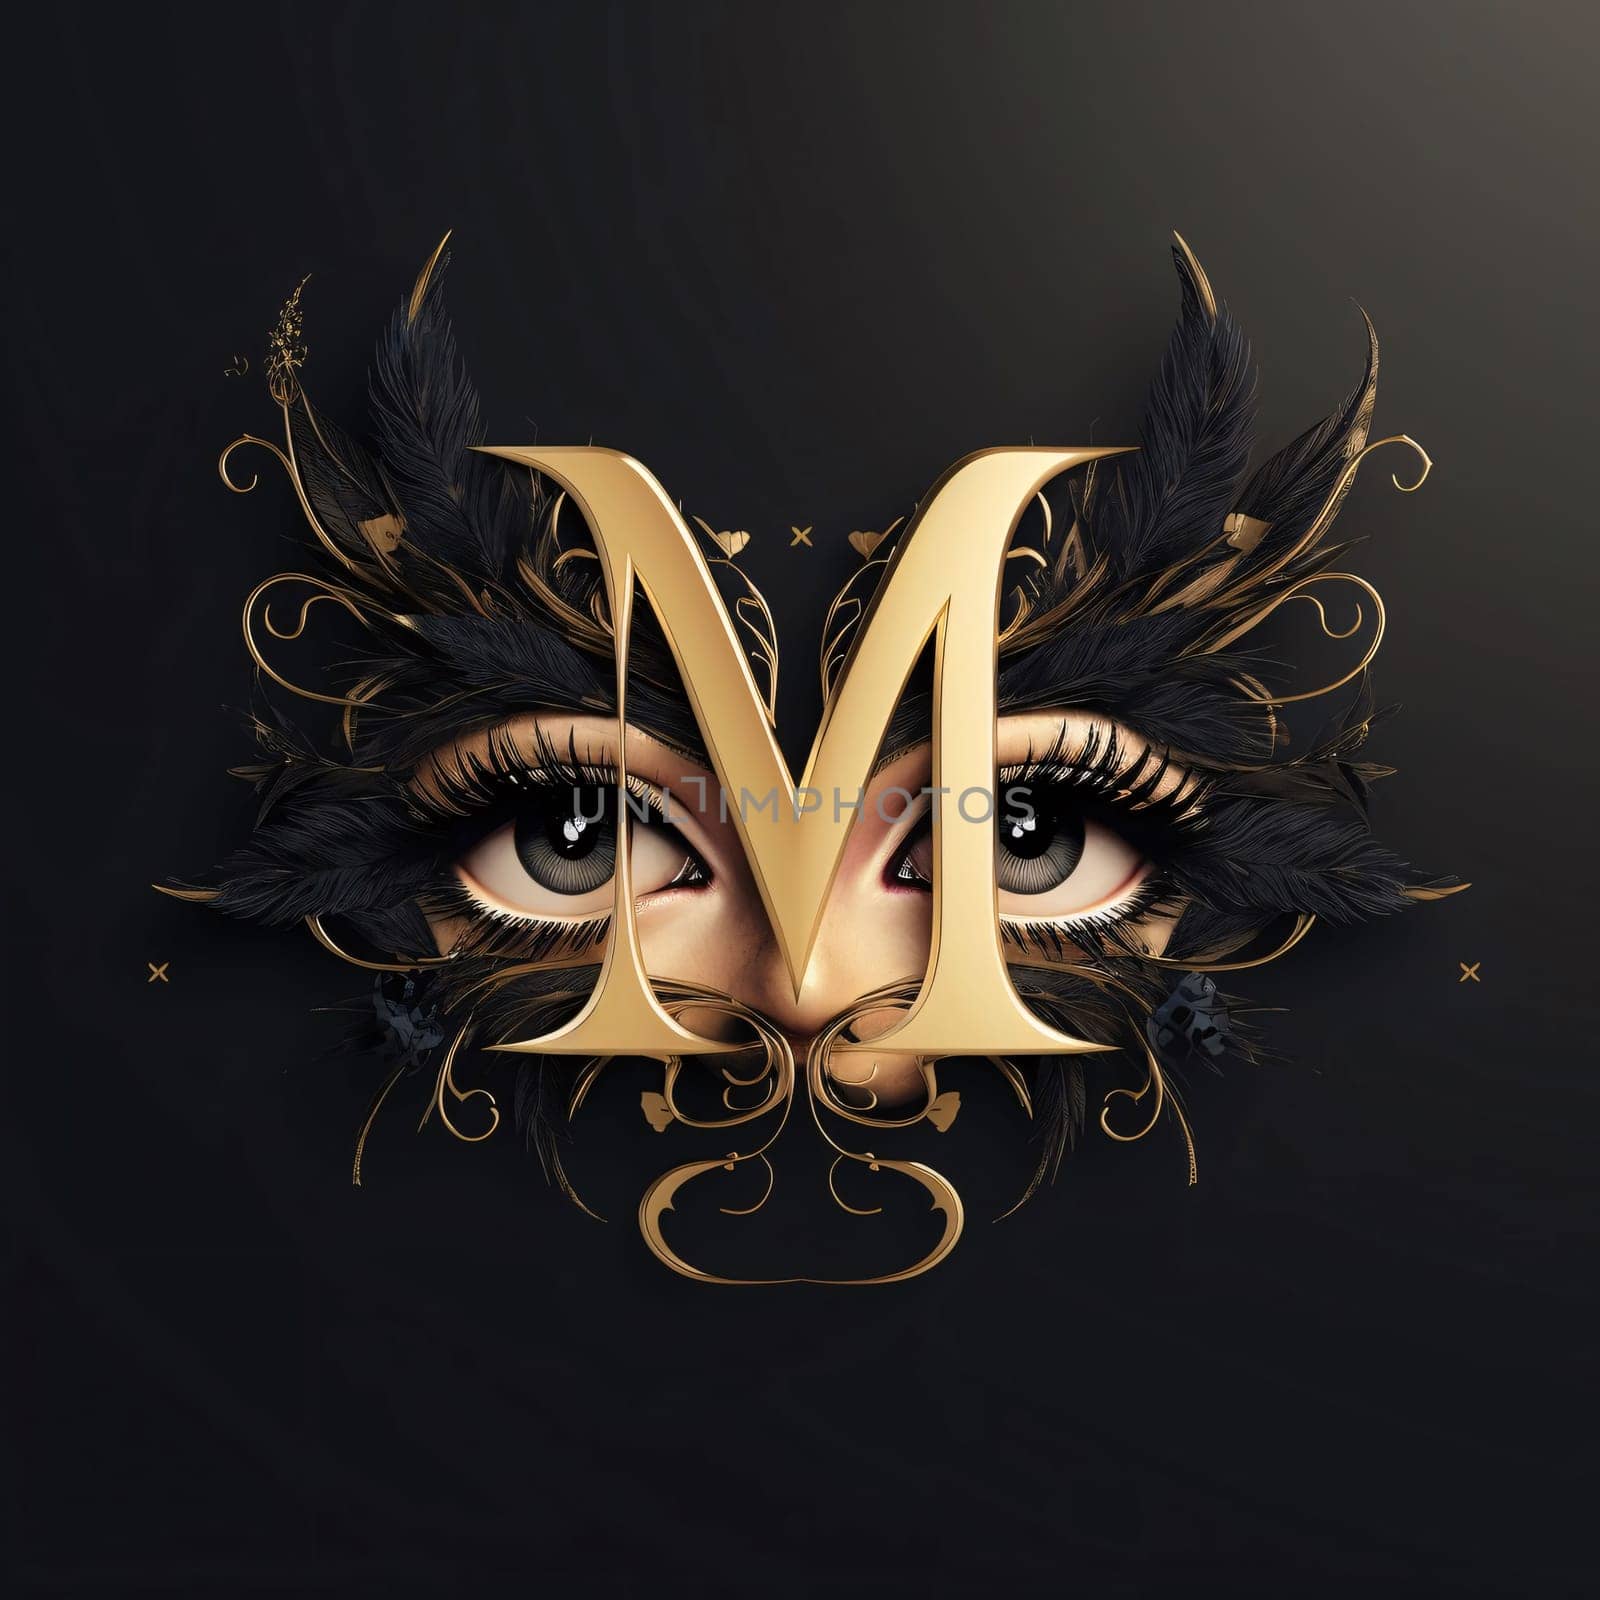 Graphic alphabet letters: Beautiful woman face with black feathers and golden letter M on black background